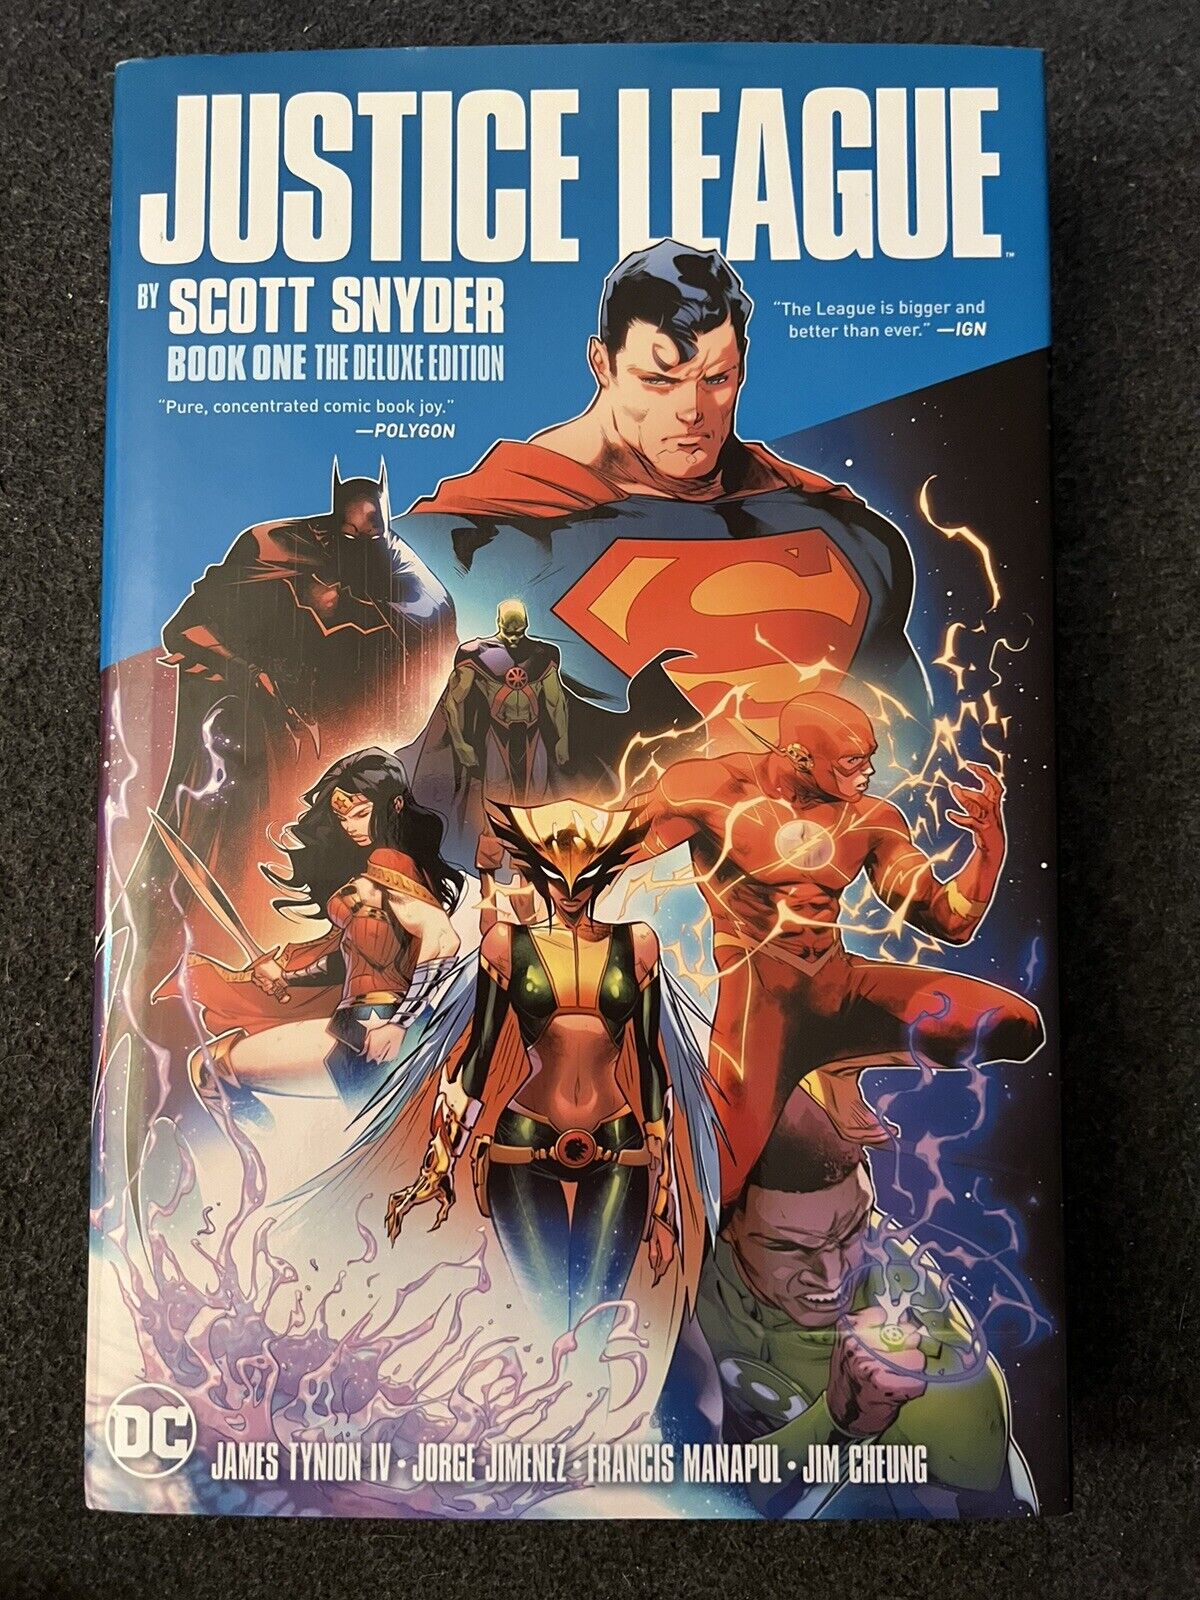 DC JUSTICE LEAGUE BOOK ONE HARDCOVER BOOK BY SCOTT SNYDER - NEW